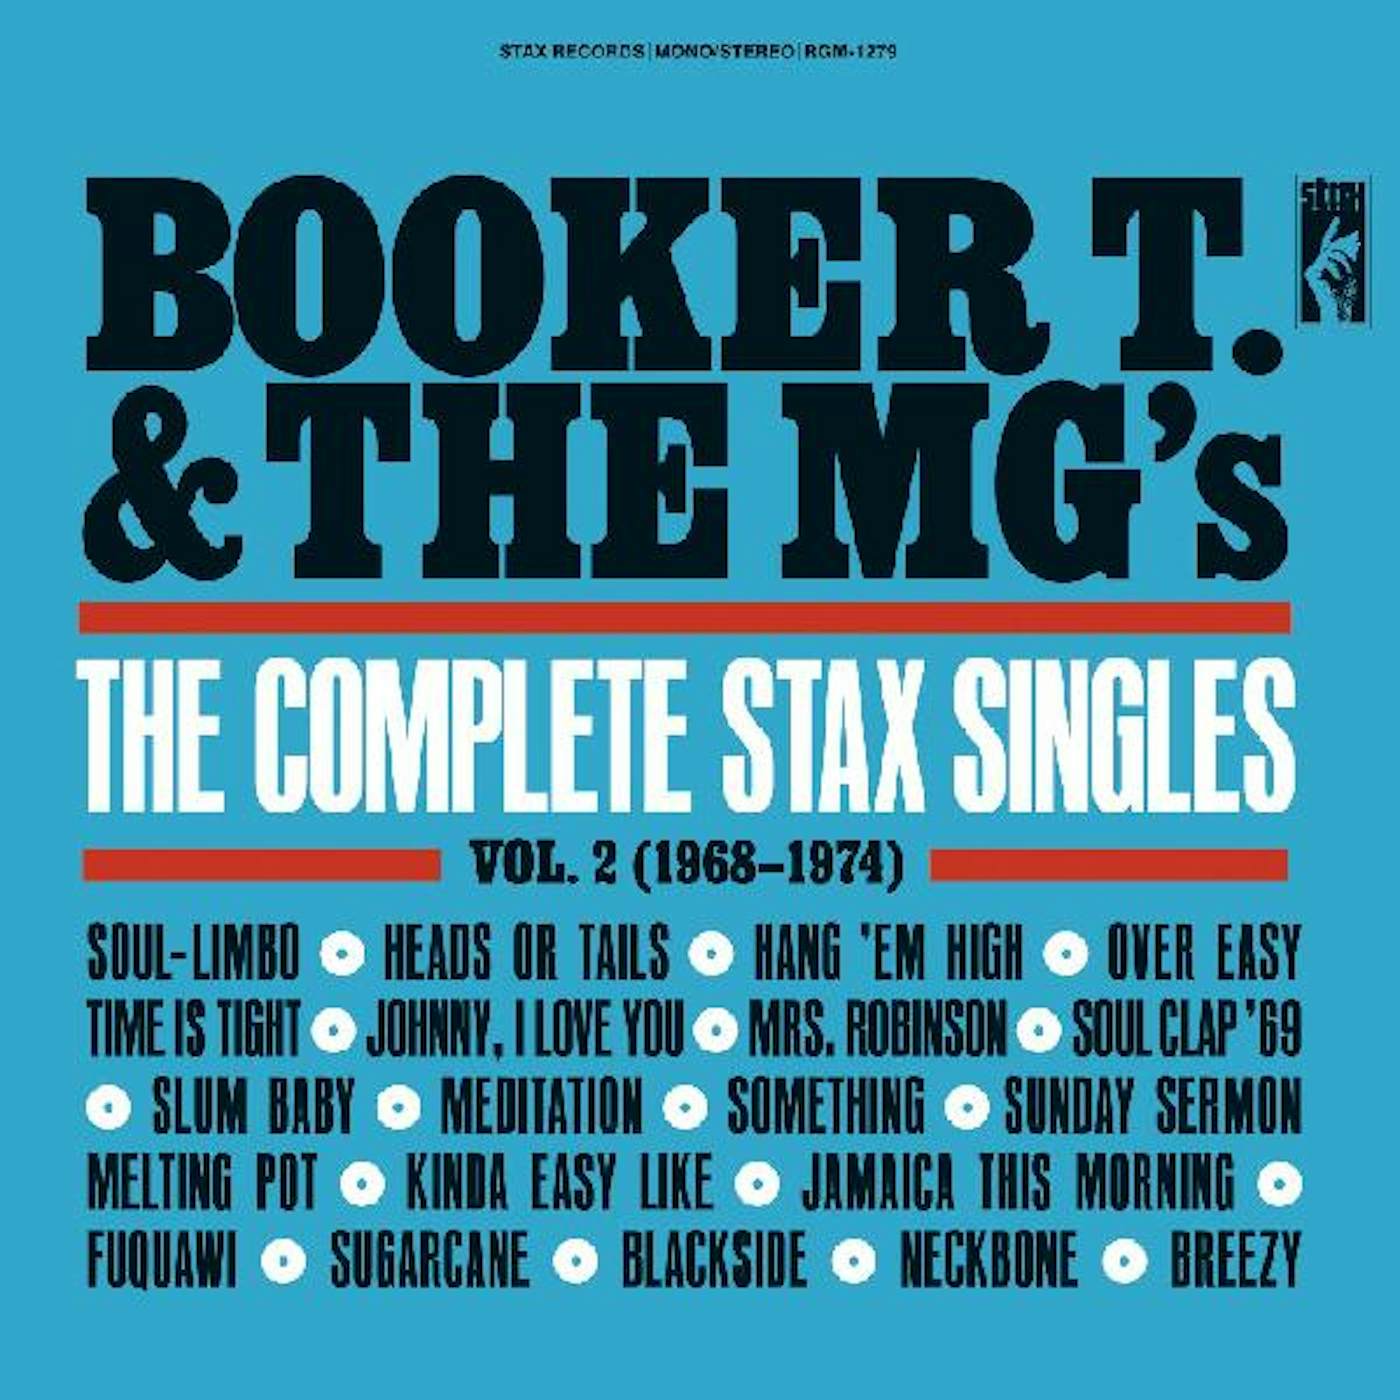 Booker T. & the M.G.'s COMPLETE STAX SINGLES VOL. 2 (1968-1974) (2LP/RED VINYL) Vinyl Record